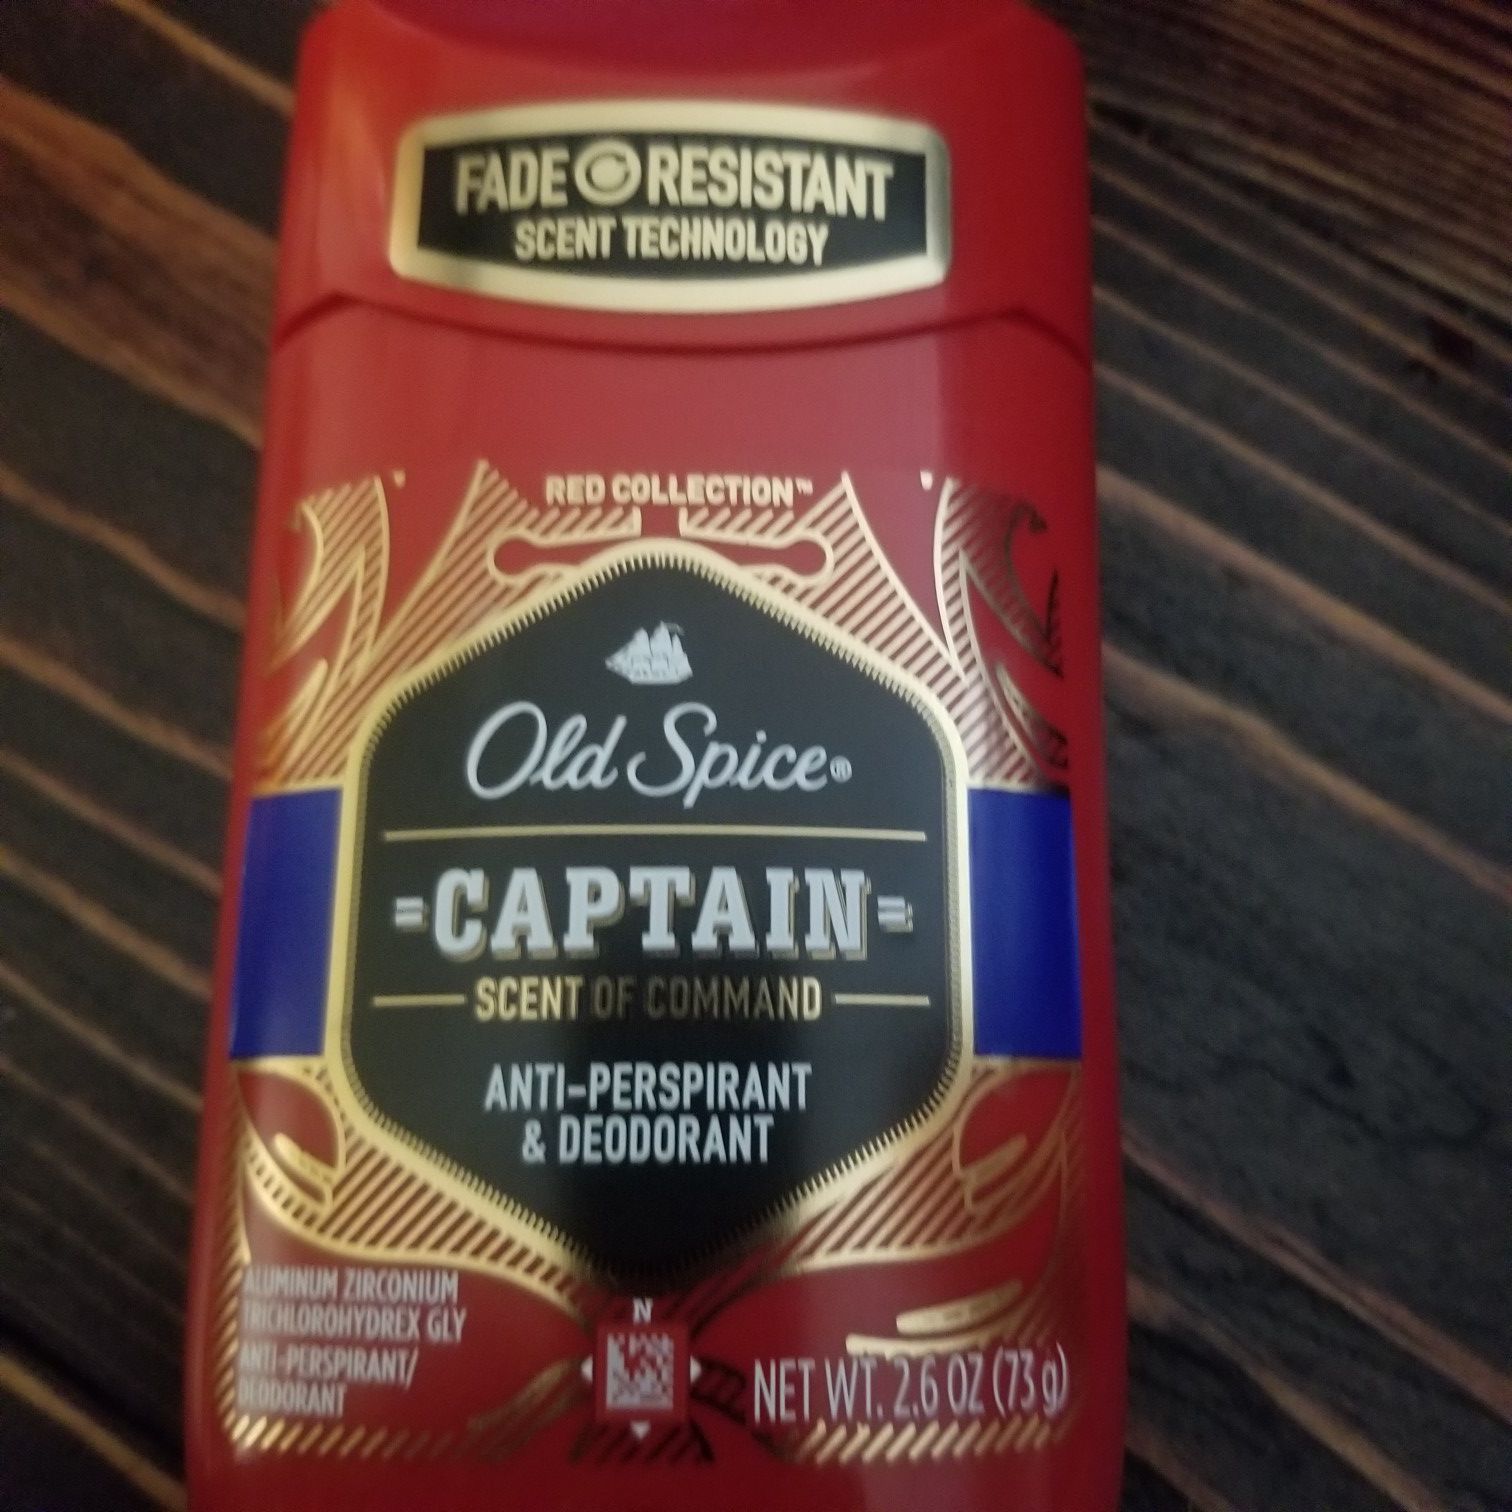 Old spice deorderant